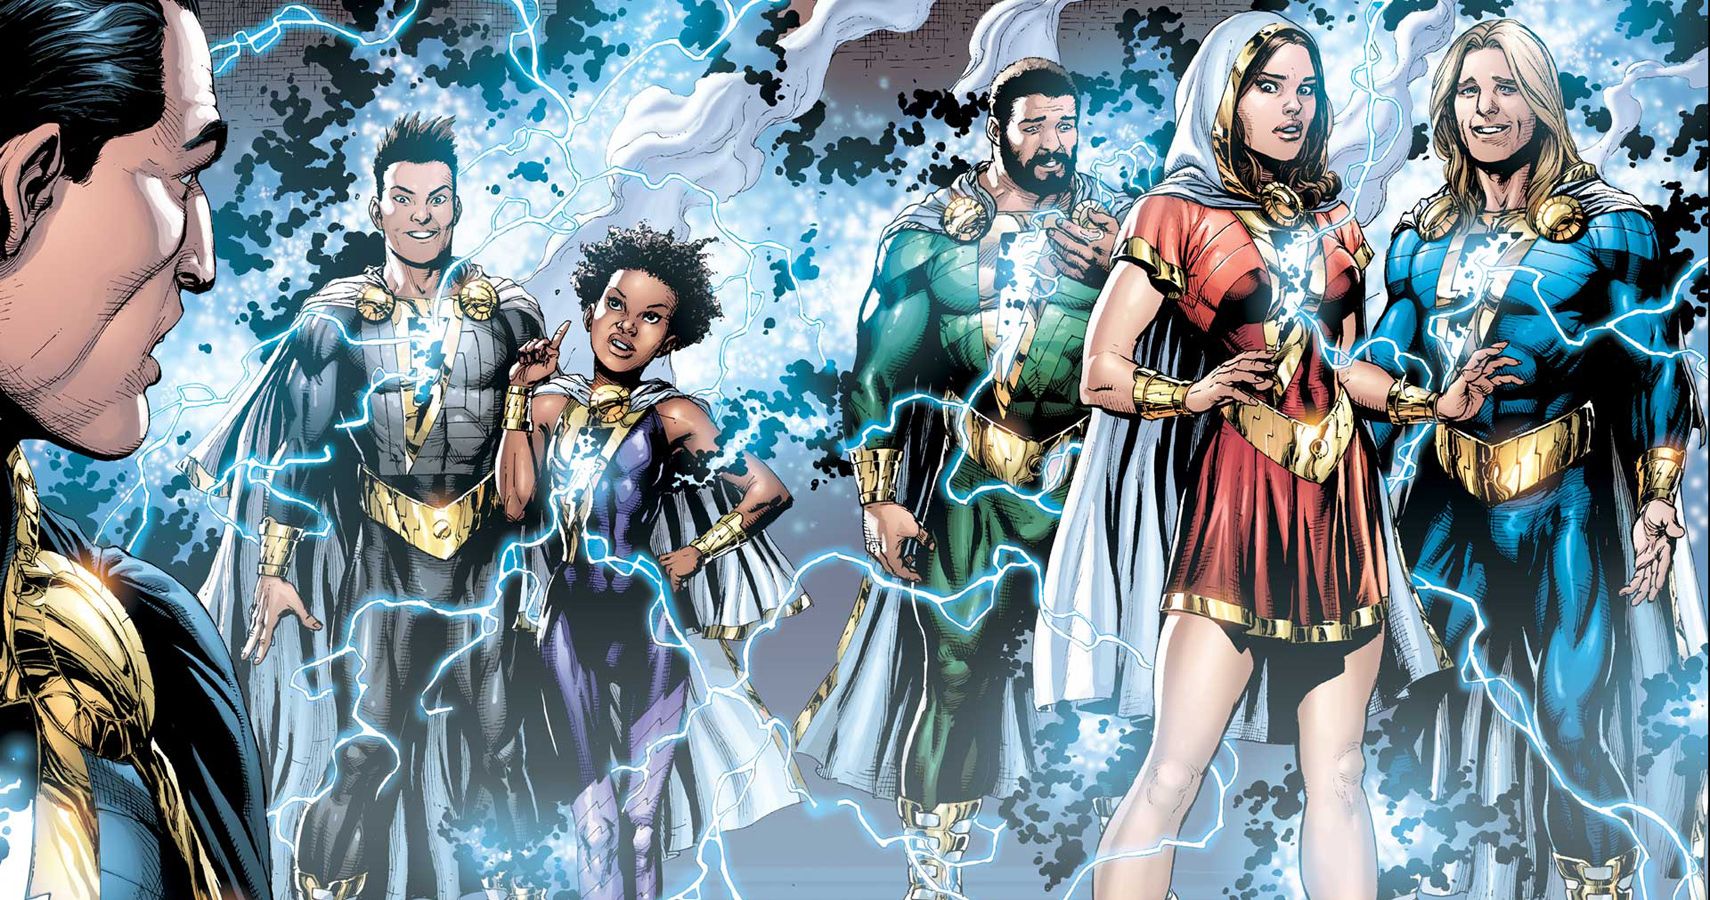 Shazam The 10 Most Powerful Members Of The Marvel Family Ranked Exos heroes db is a database for the exos heroes gacha game. shazam the 10 most powerful members of